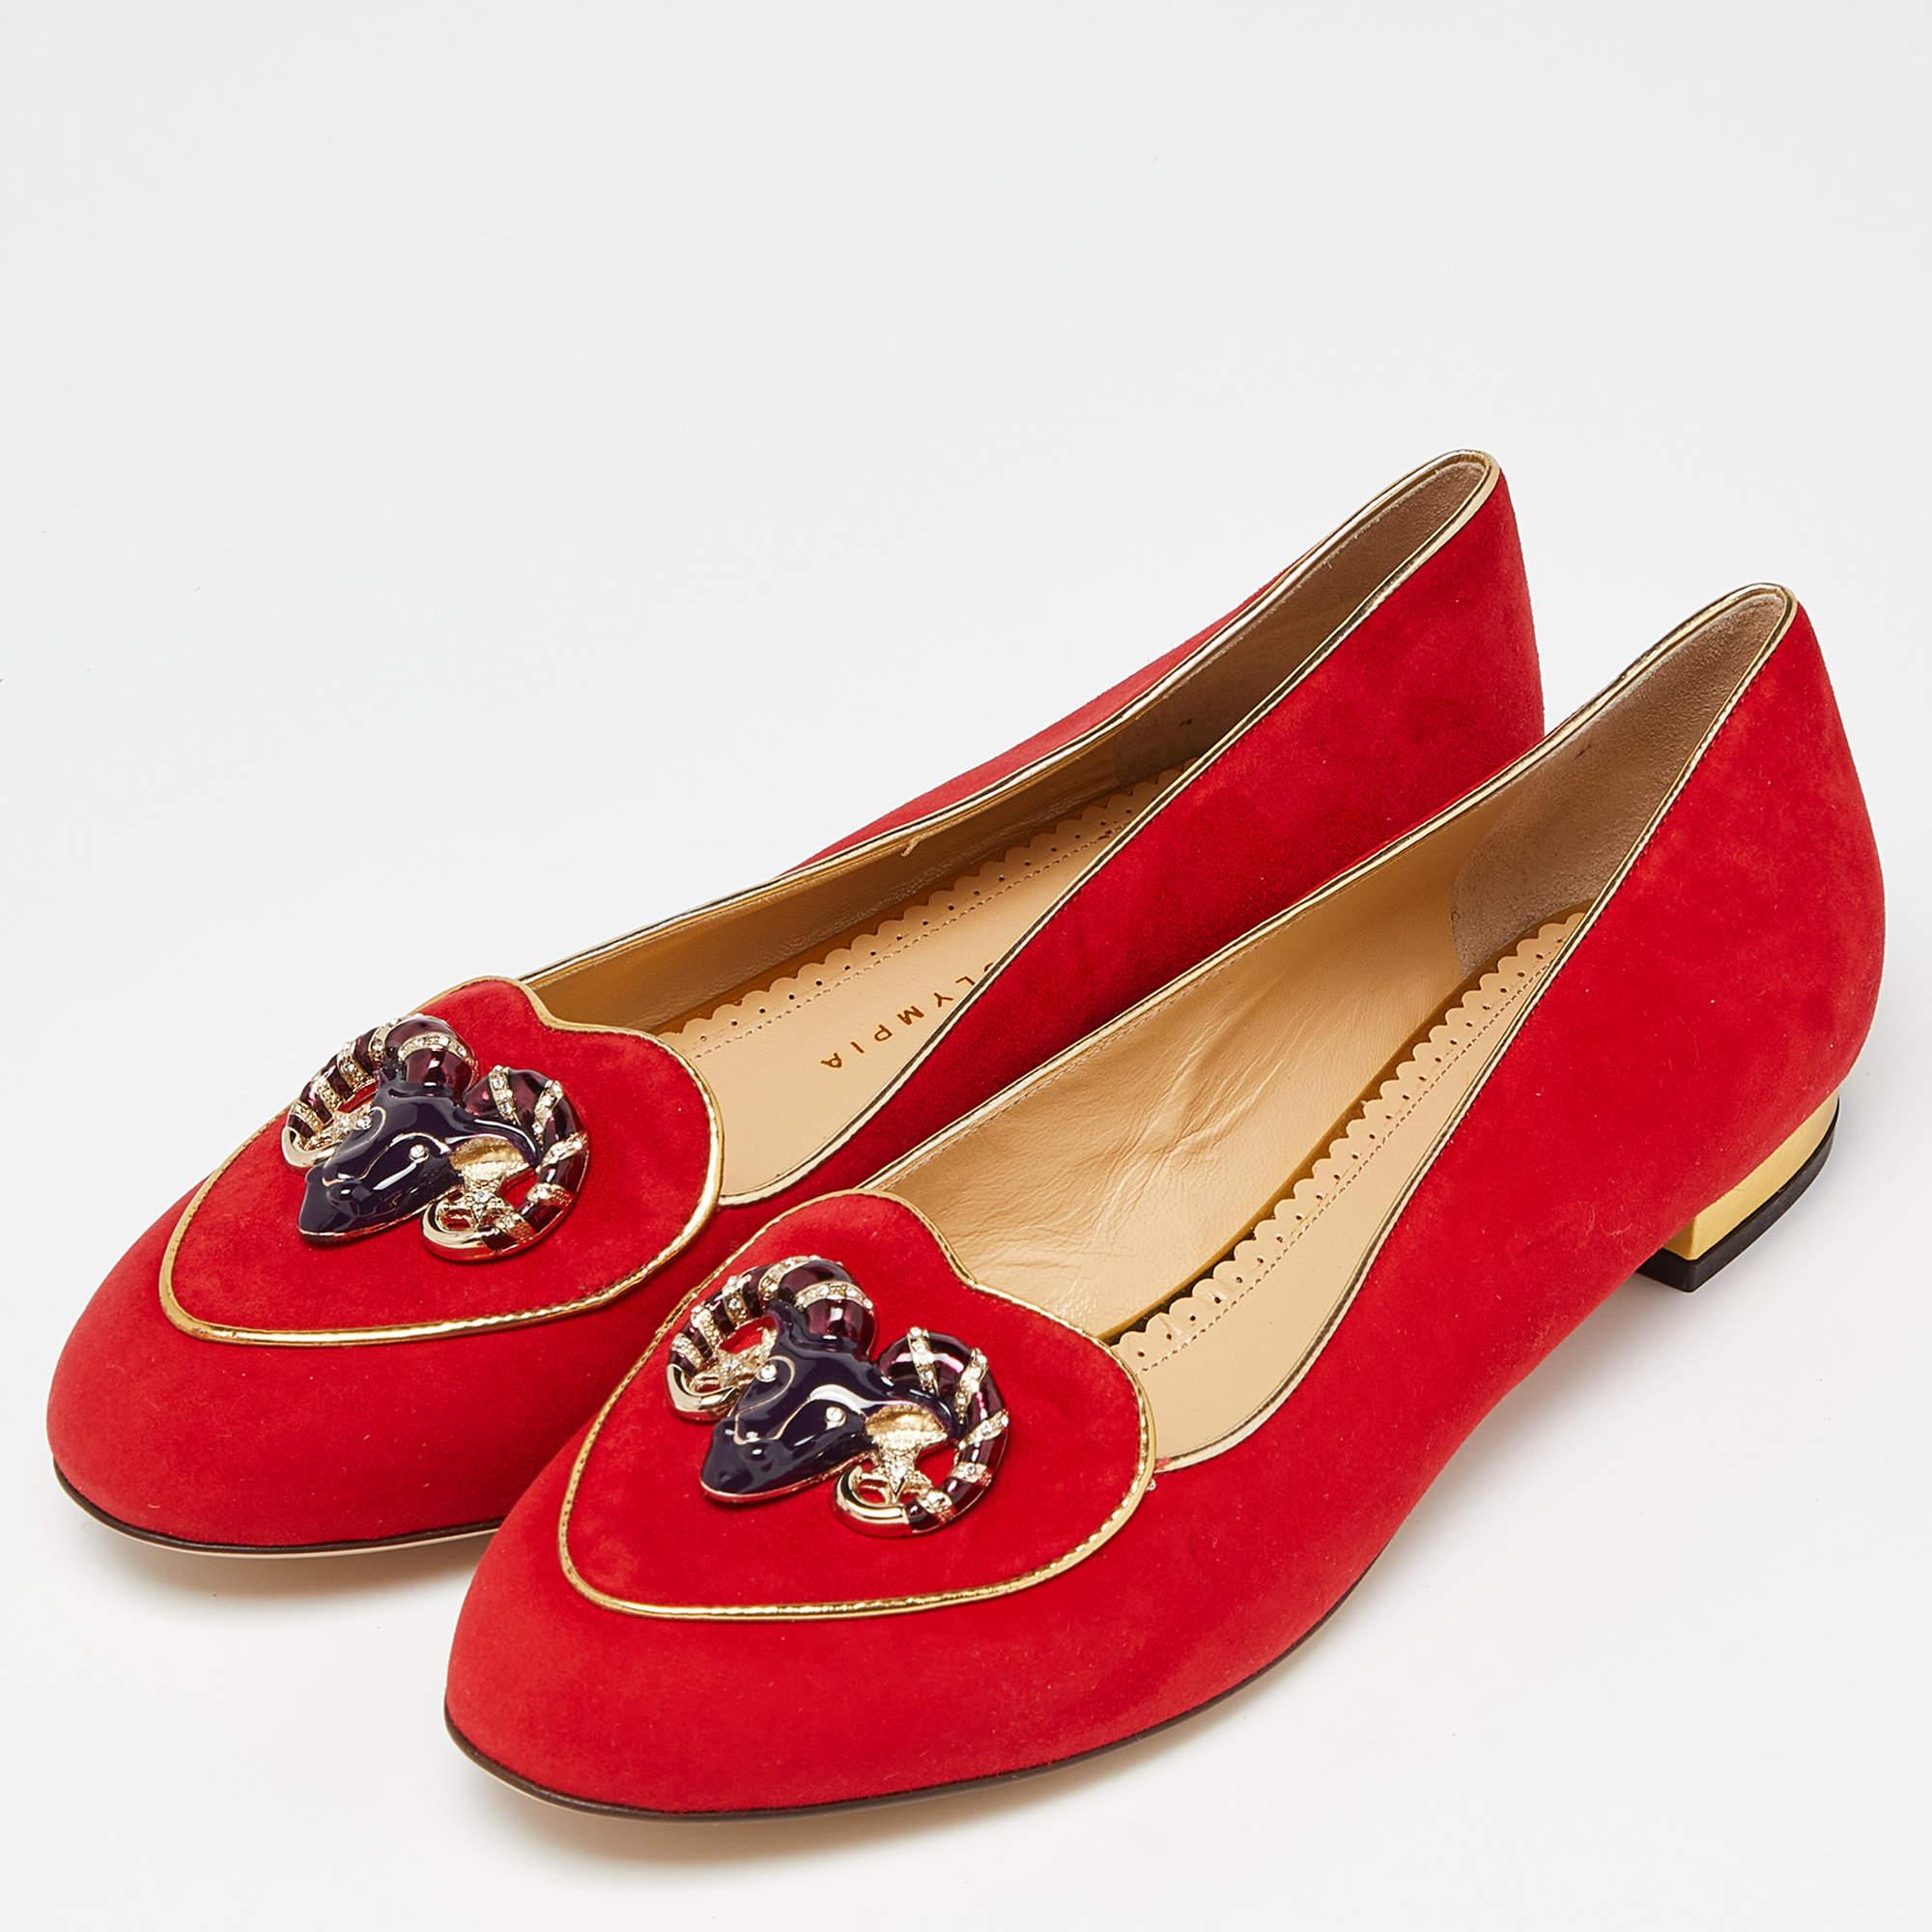 We love these Charlotte Olympia smoking slippers from the Cosmic collection. Made from red-colored suede, they feature Aries bull zodiac symbols that are embellished.

